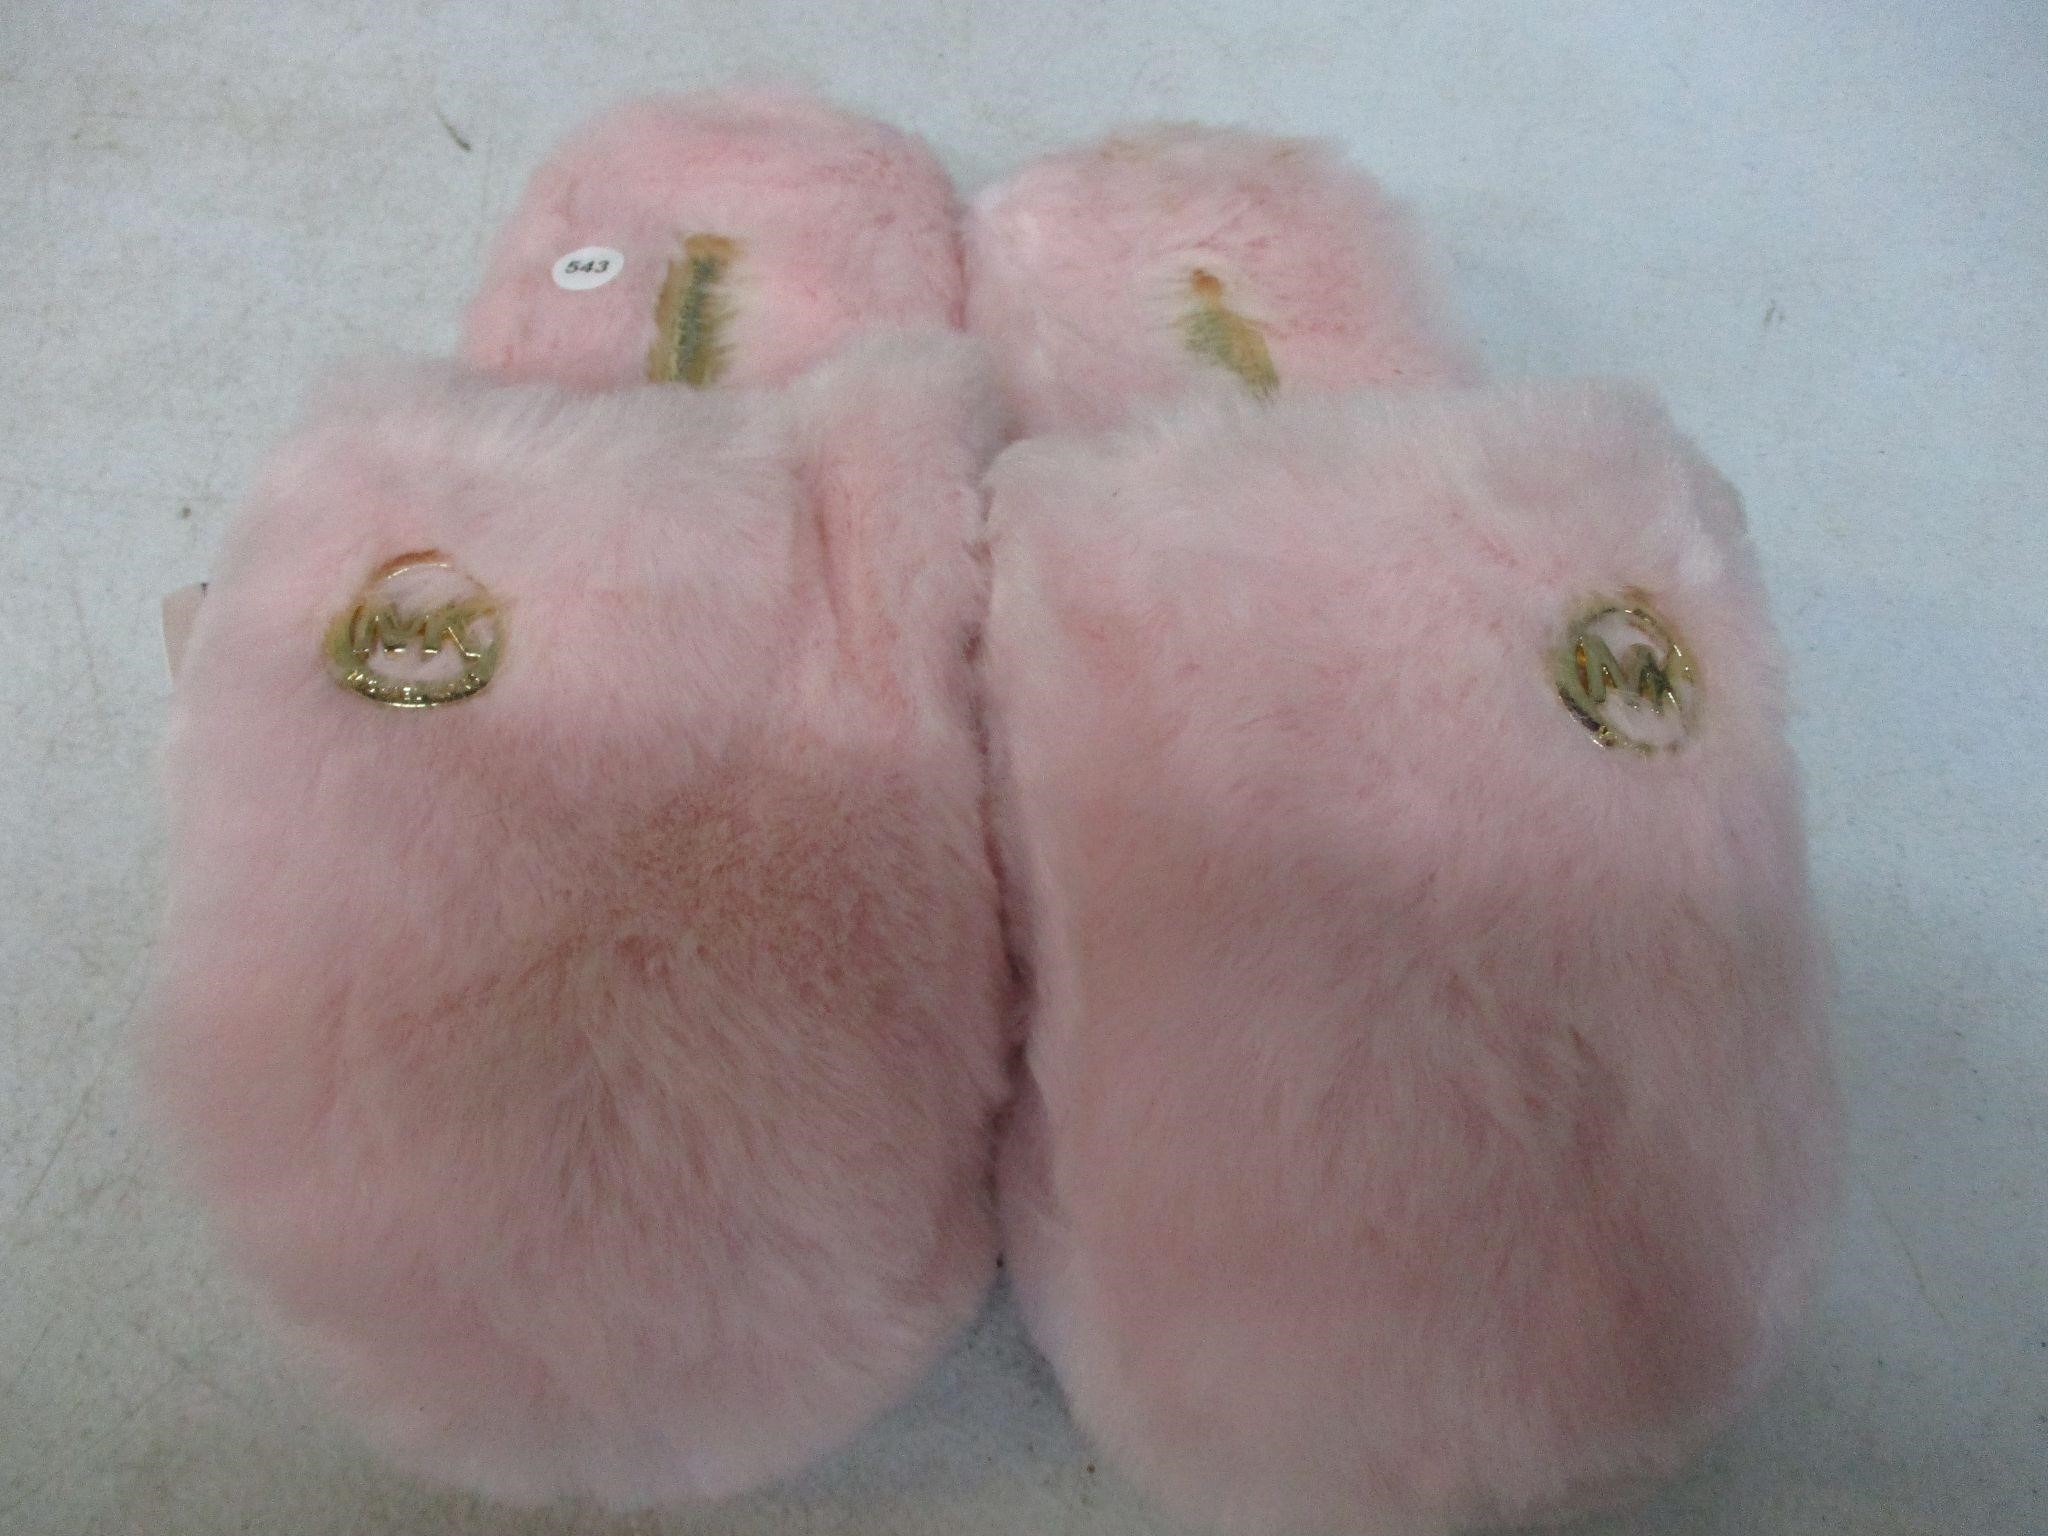 Michael Kors Pink Fuzzy Slippers